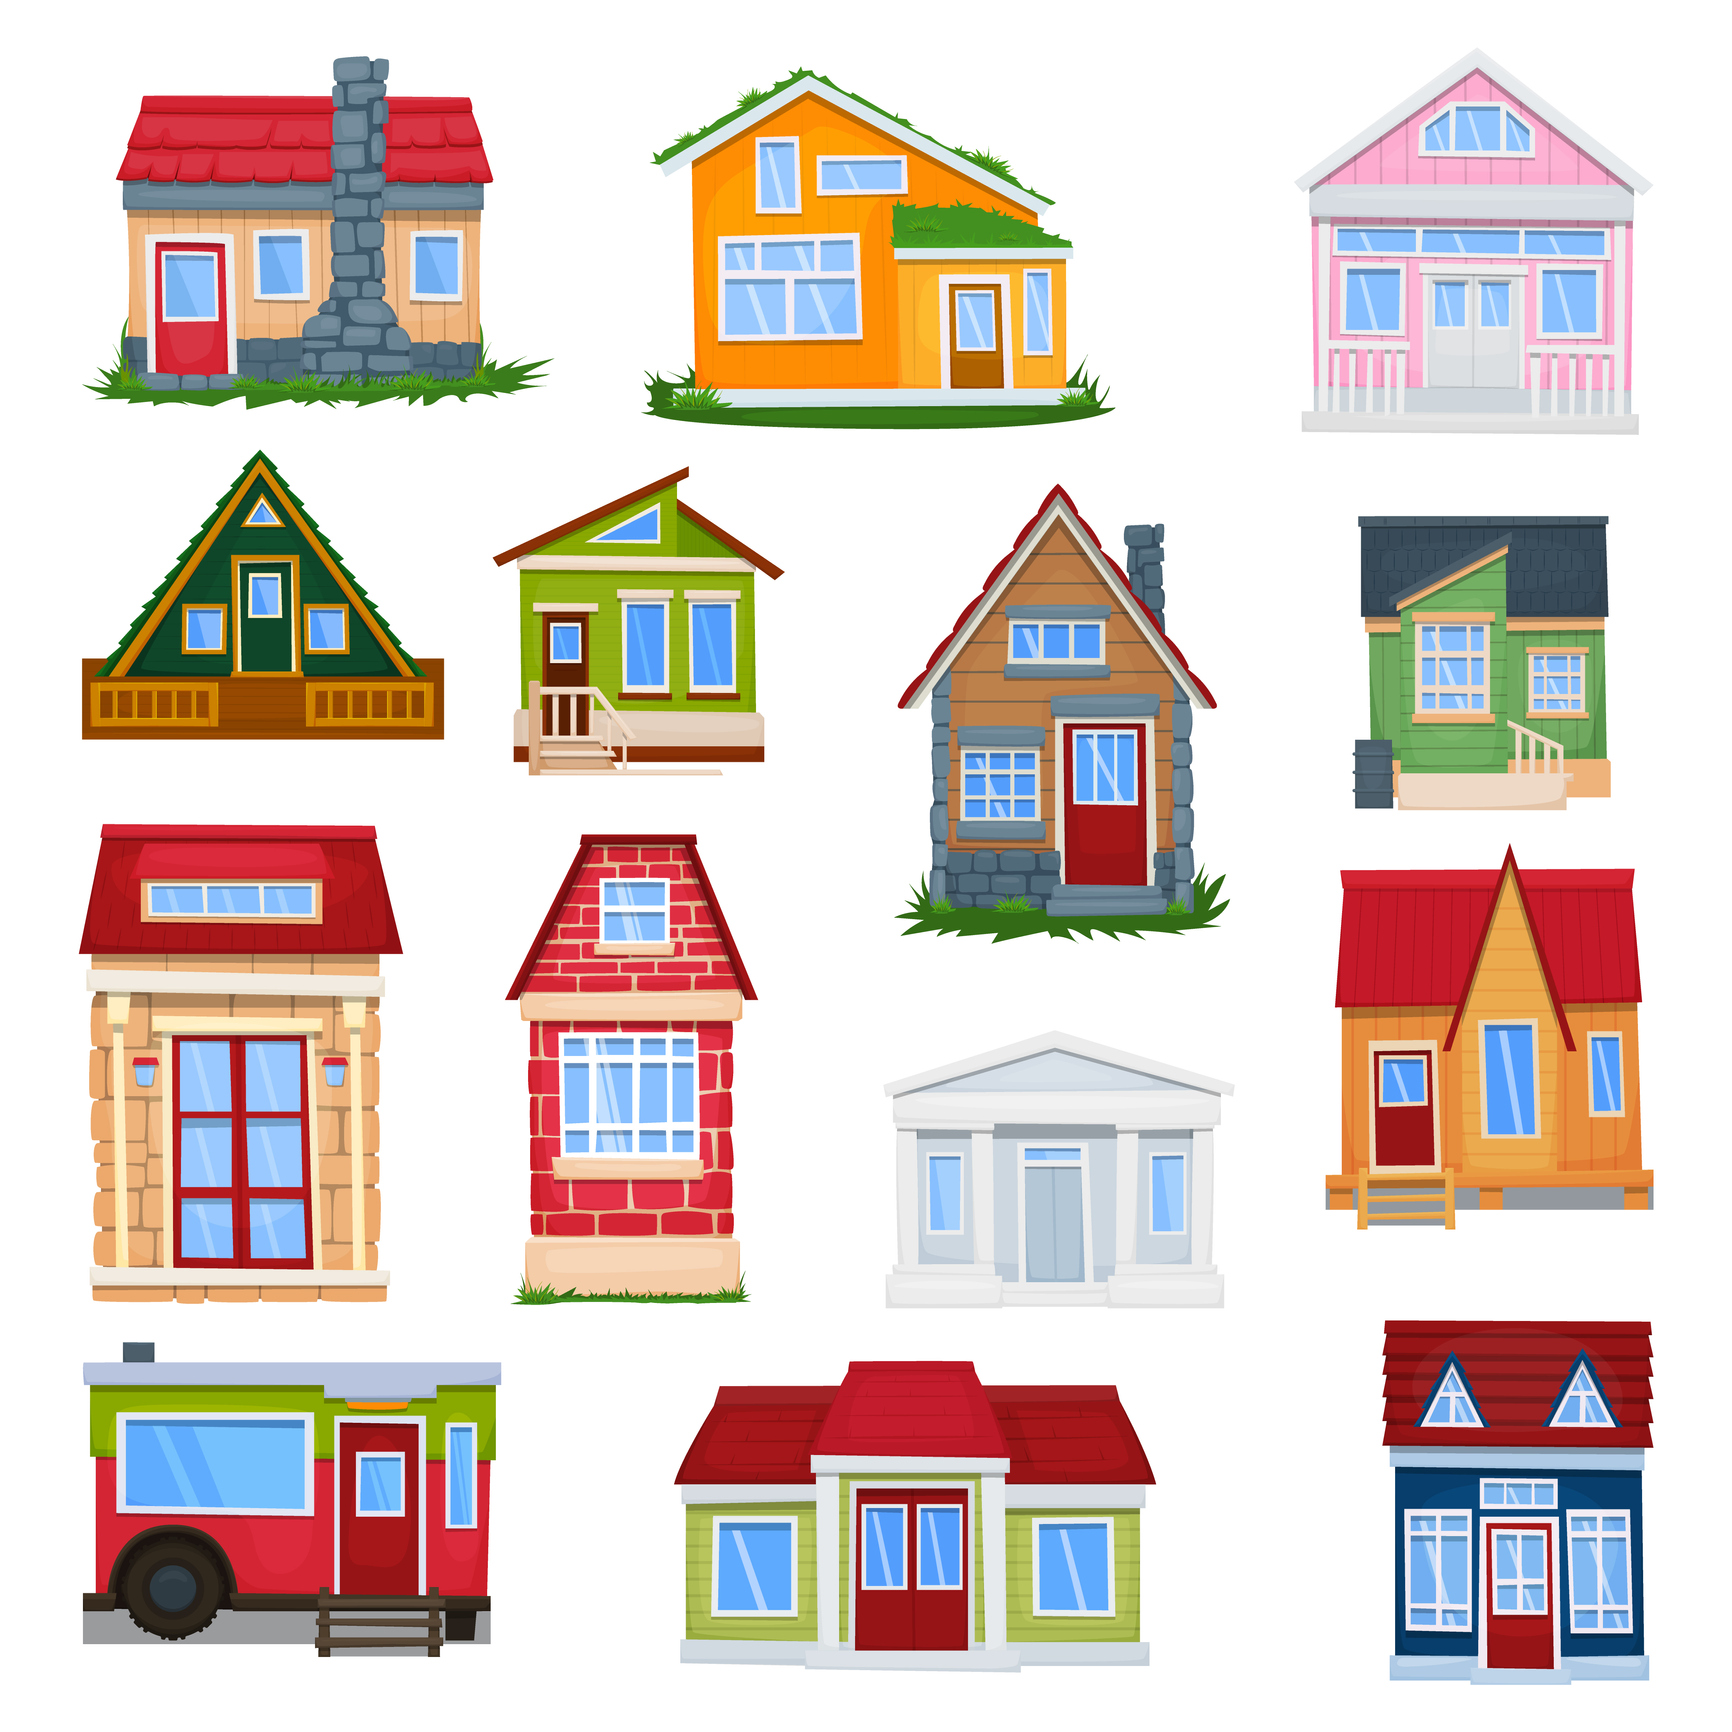 Houses front view. A set of tiny houses. Vector illustration